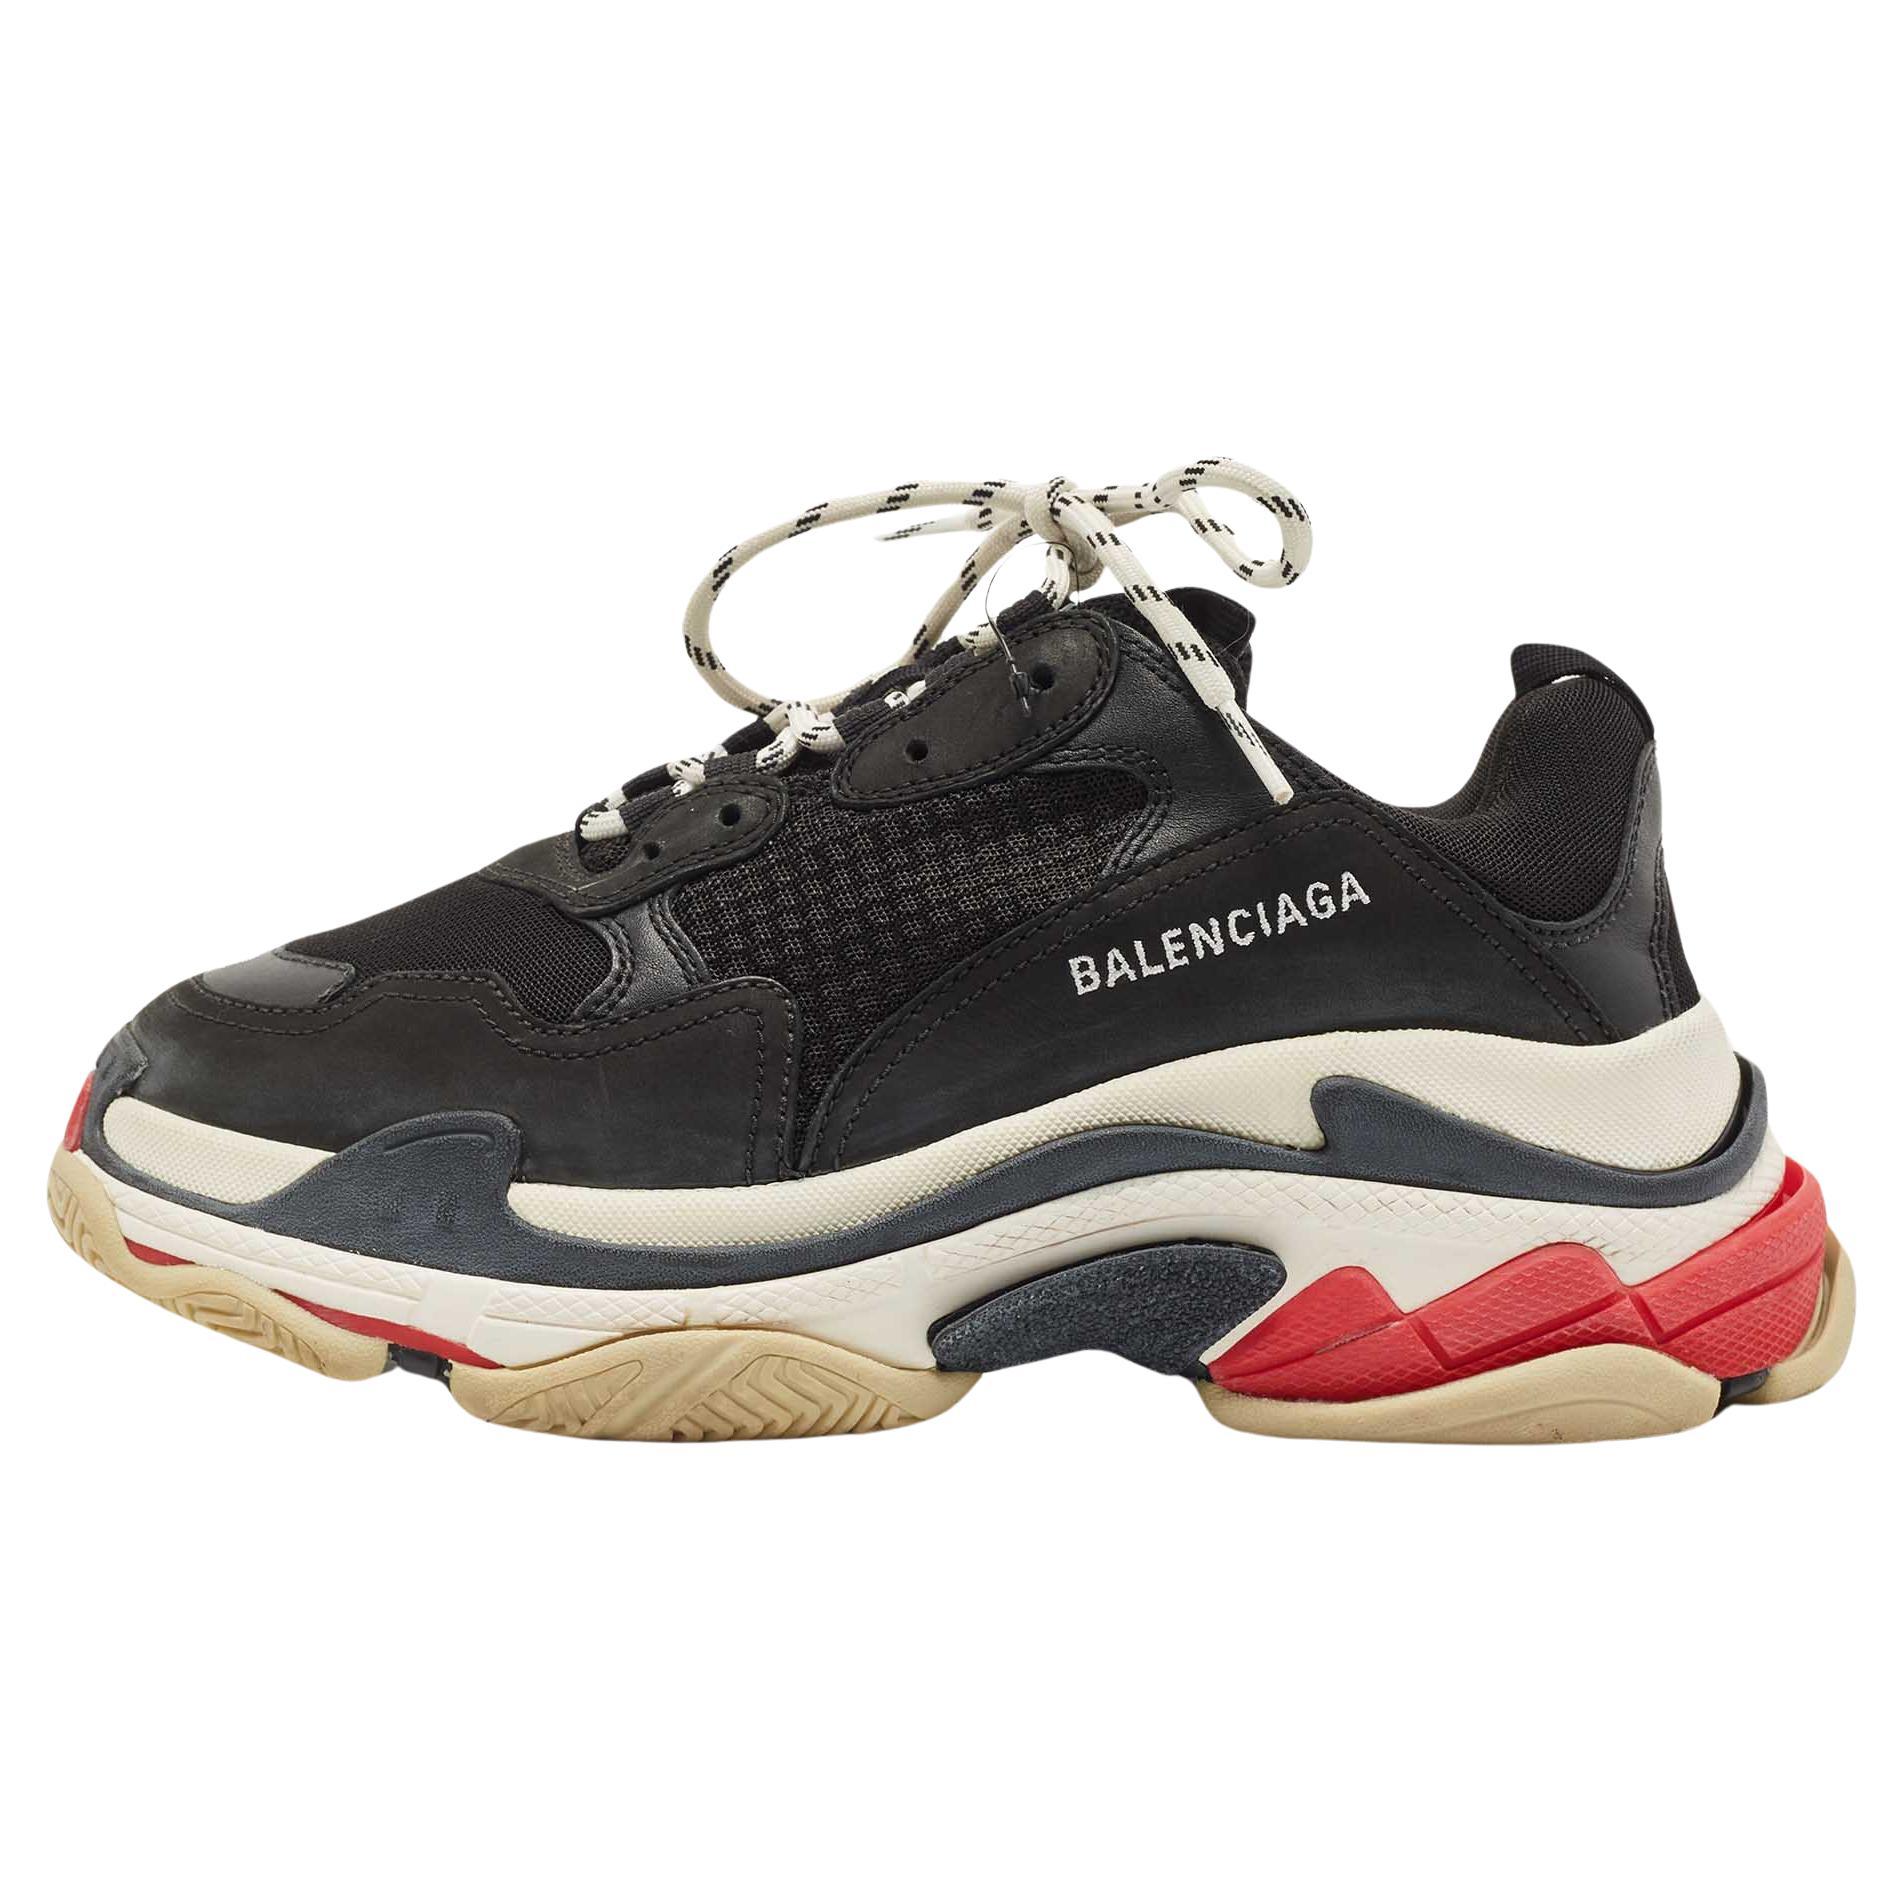 Balenciaga Black Mesh and Leather Triple S Lace Up Sneaker For Sale